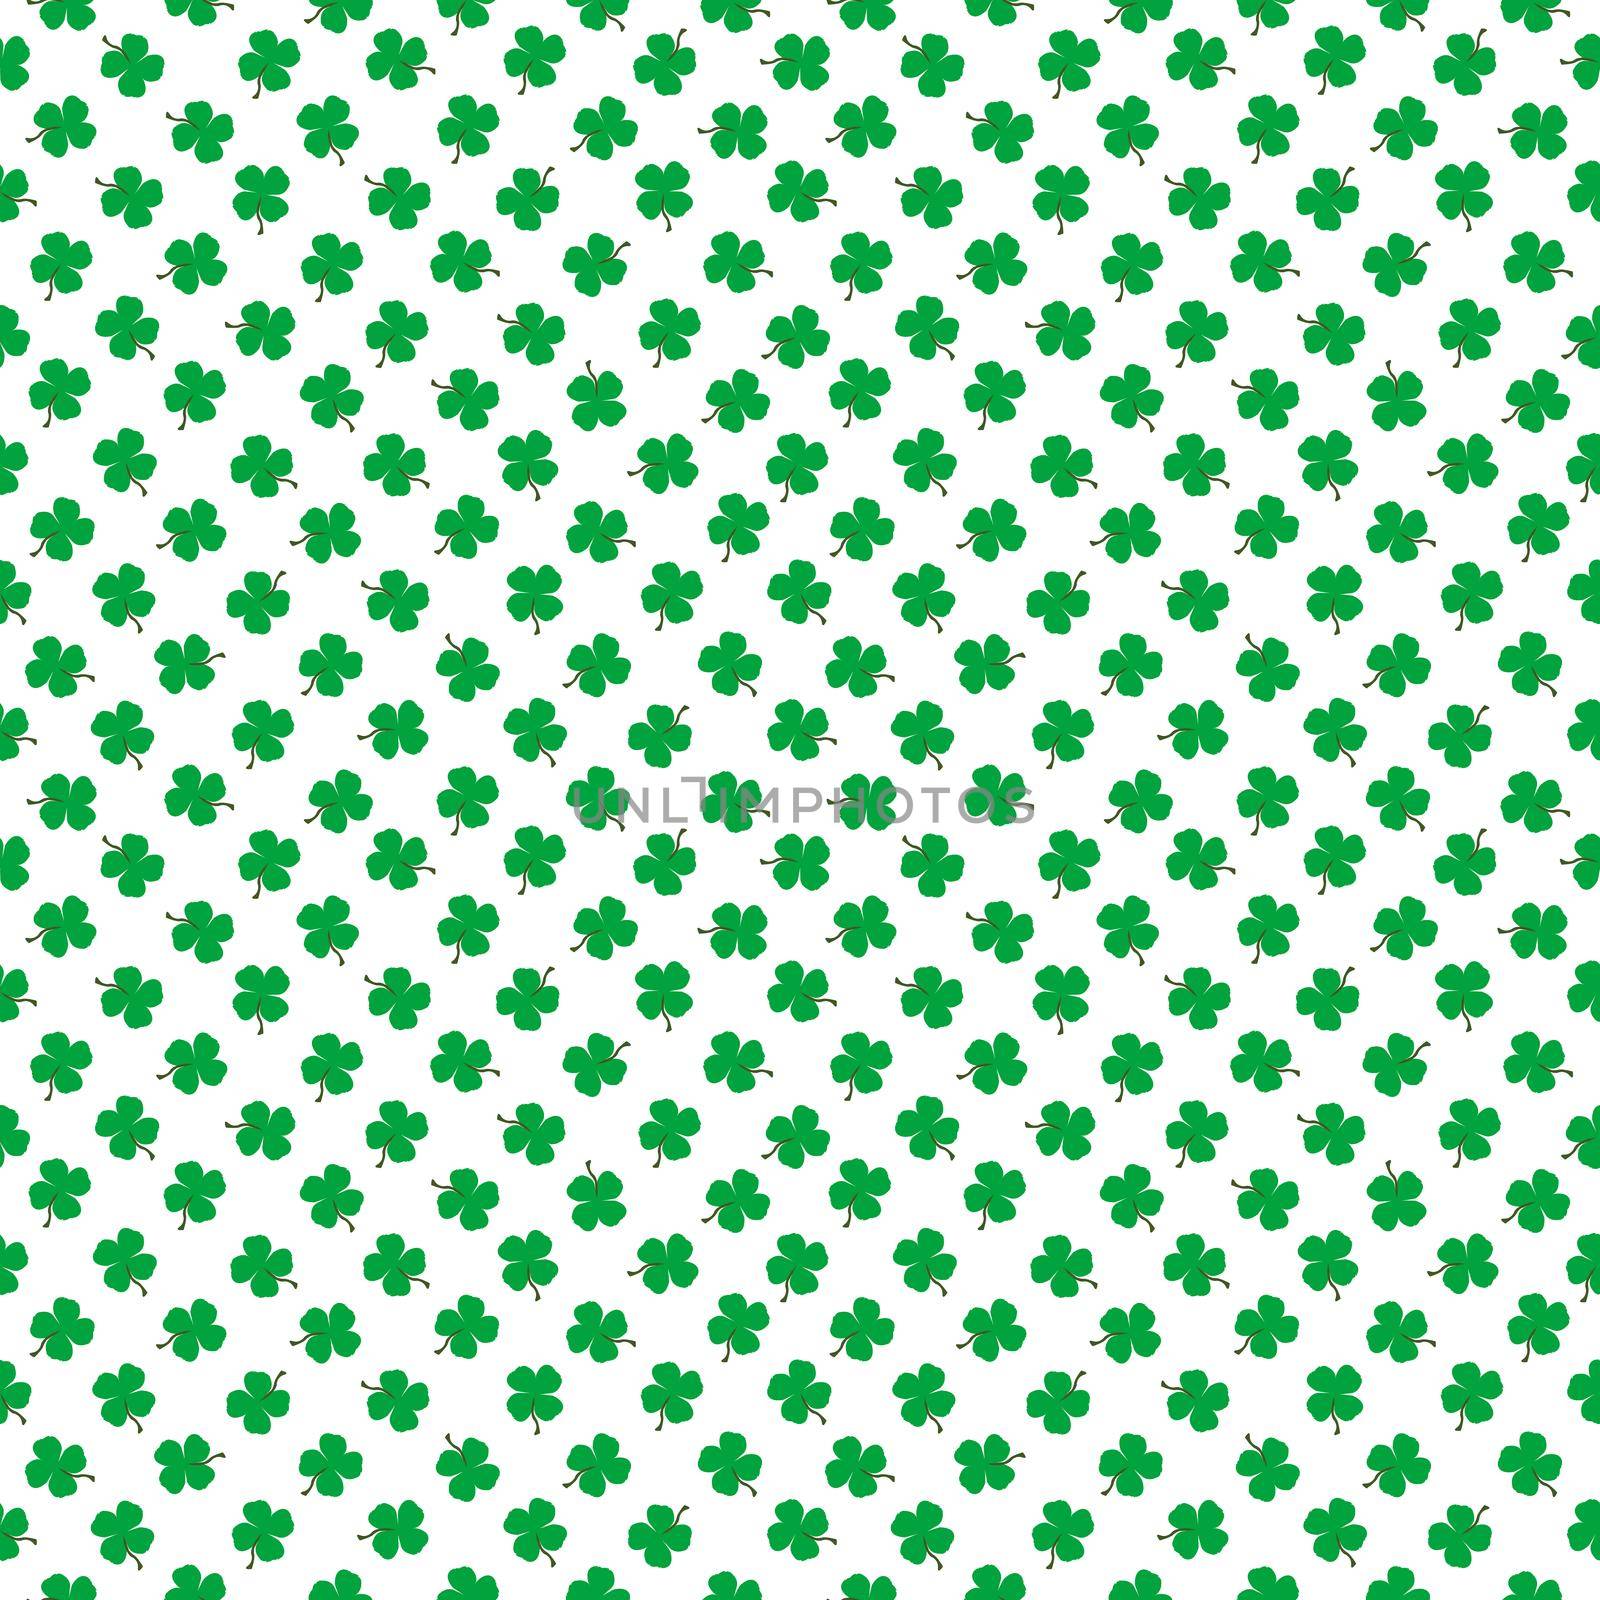 Seamless pattern with clovers on white background in polka dot style